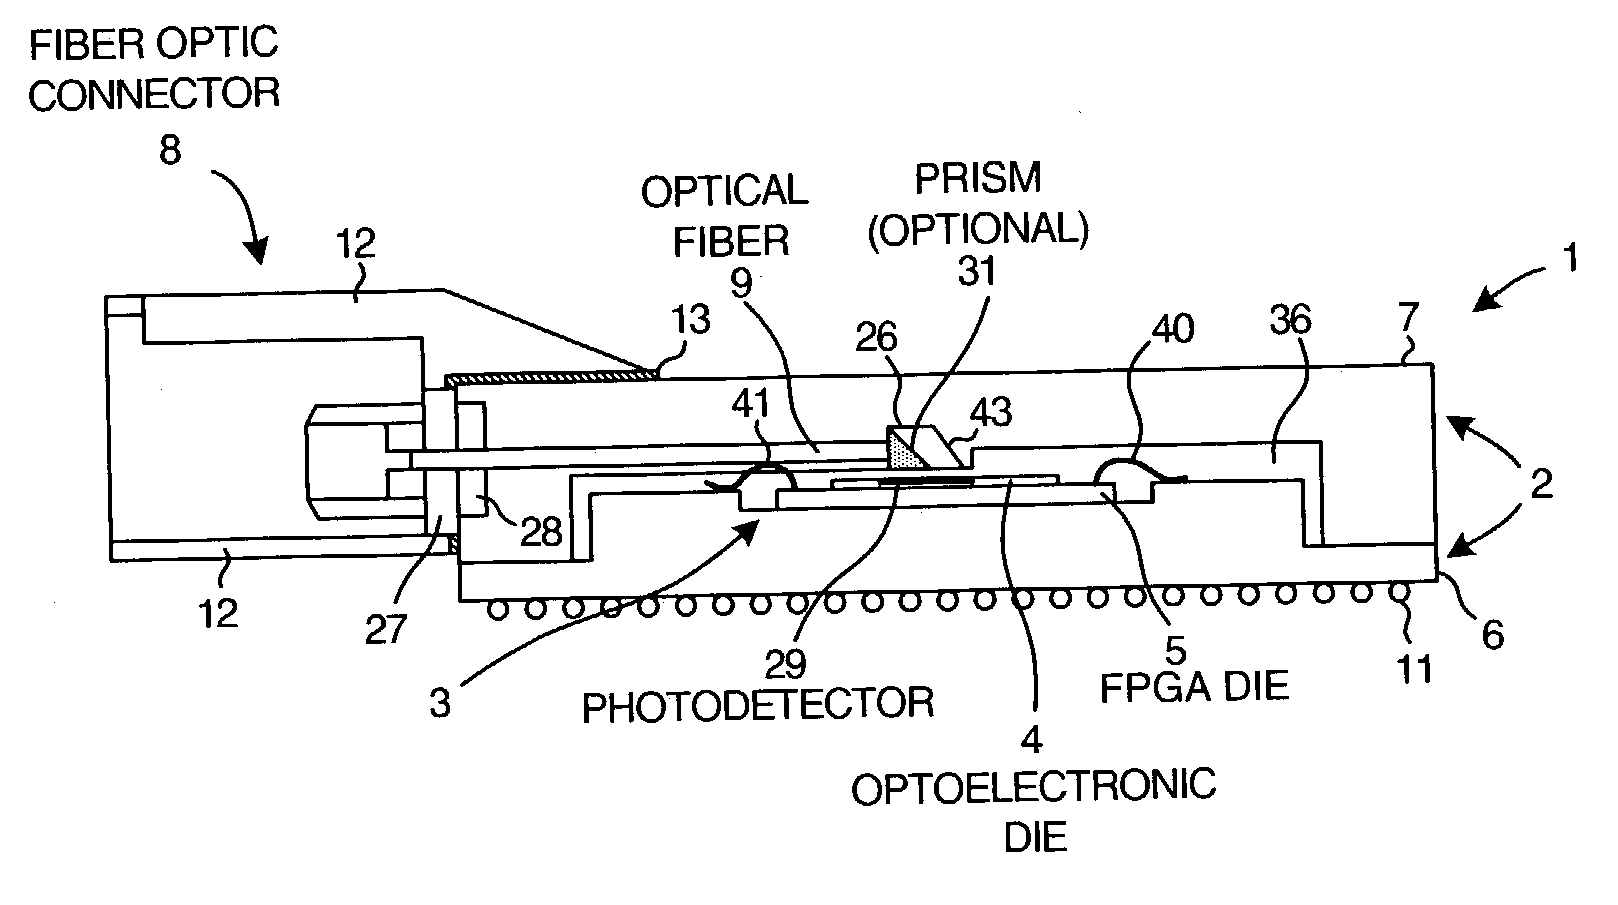 Fiber optic field programmable gate array integrated circuit packaging